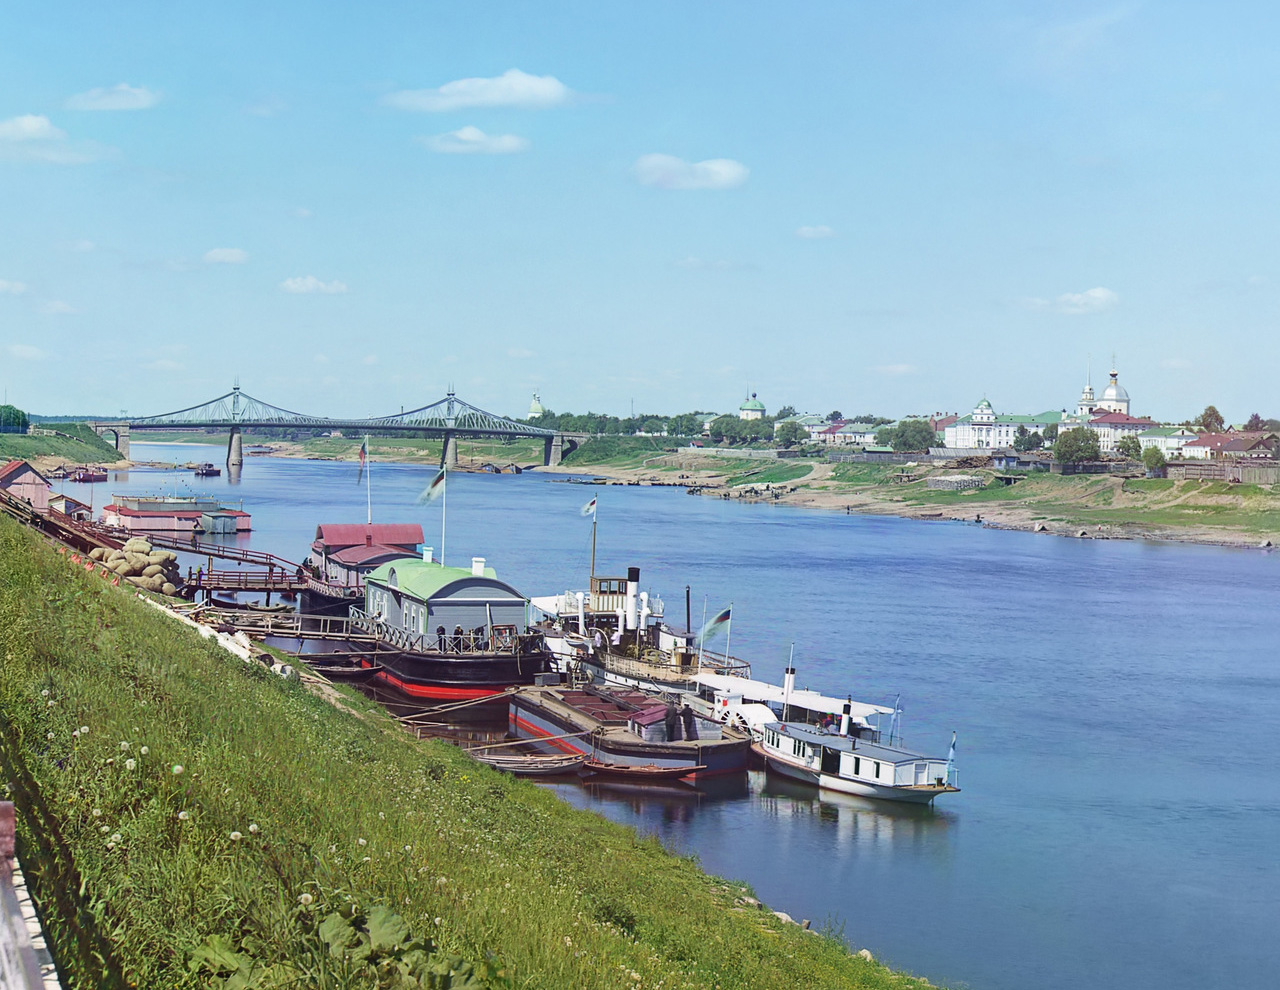 After the October Revolution, Prokudin-Gorsky was appointed to a new professorship under the new regime, but he left Soviet Russia in August 1918. / View of Tver and Volga river. 